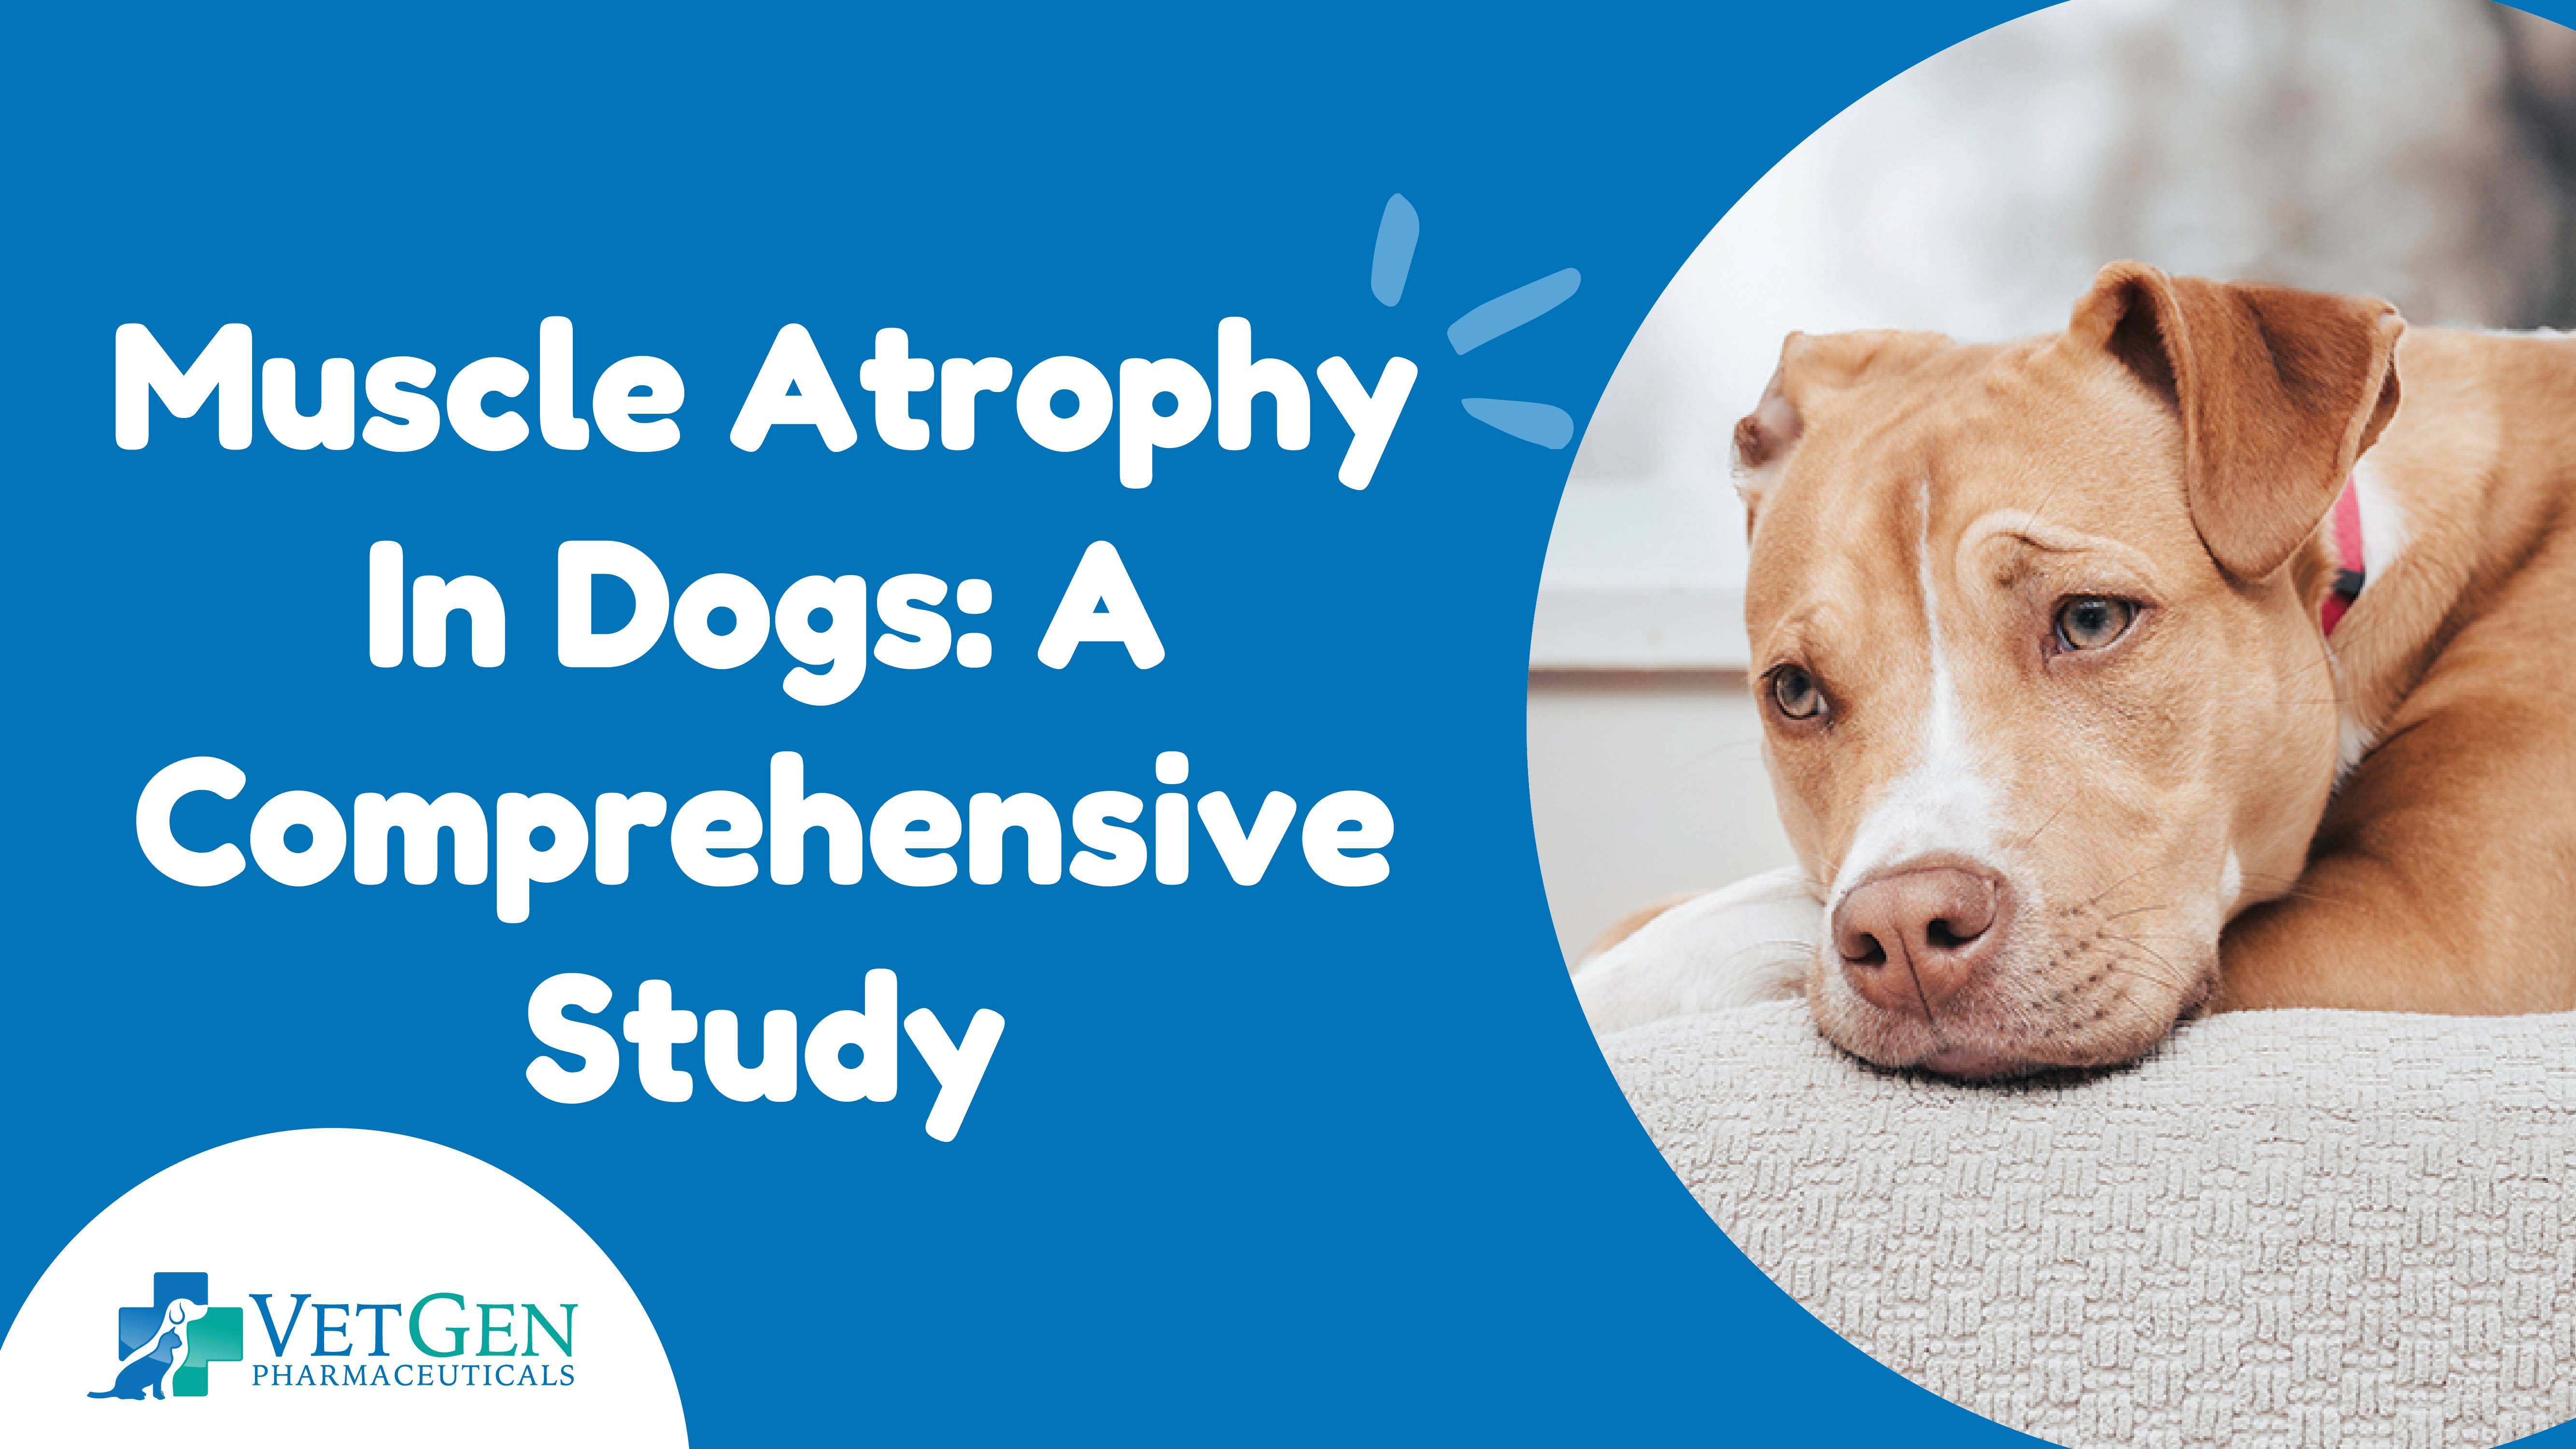 Muscle Atrophy In Dogs- A Comprehensive Study